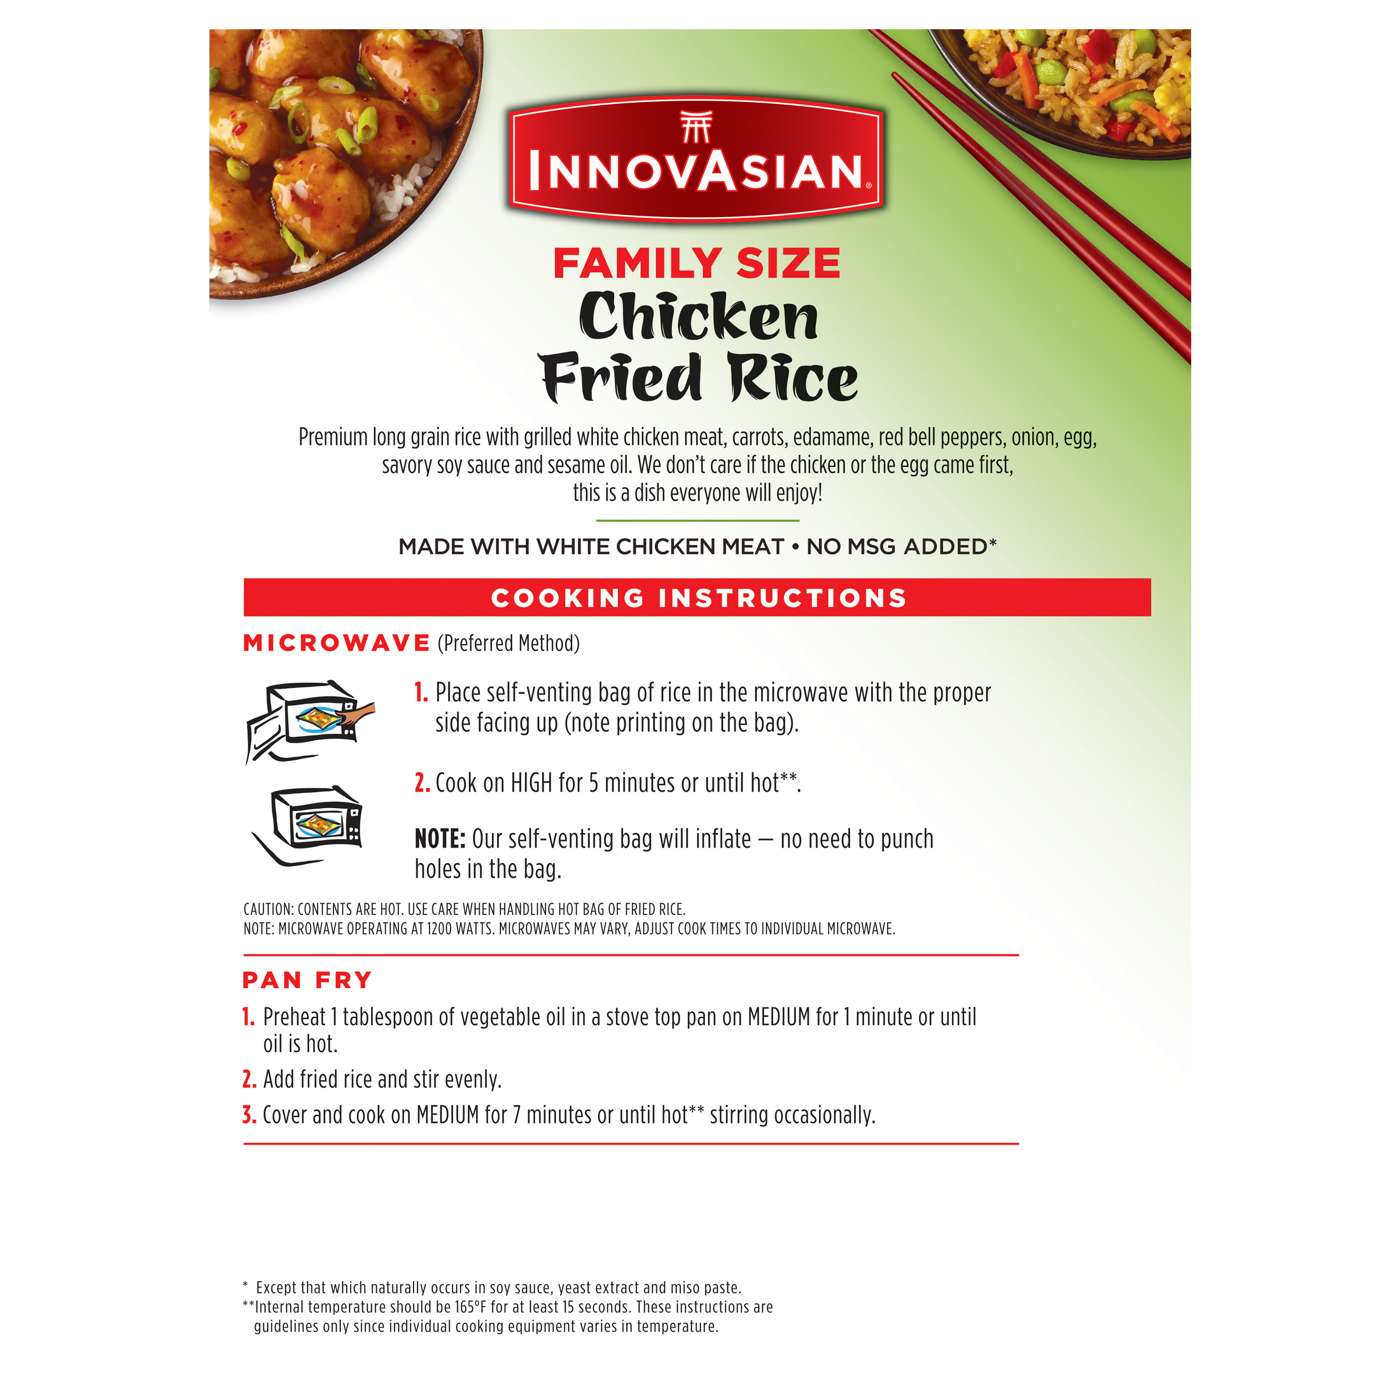 InnovAsian Frozen Chicken Fried Rice - Family-Size; image 5 of 7